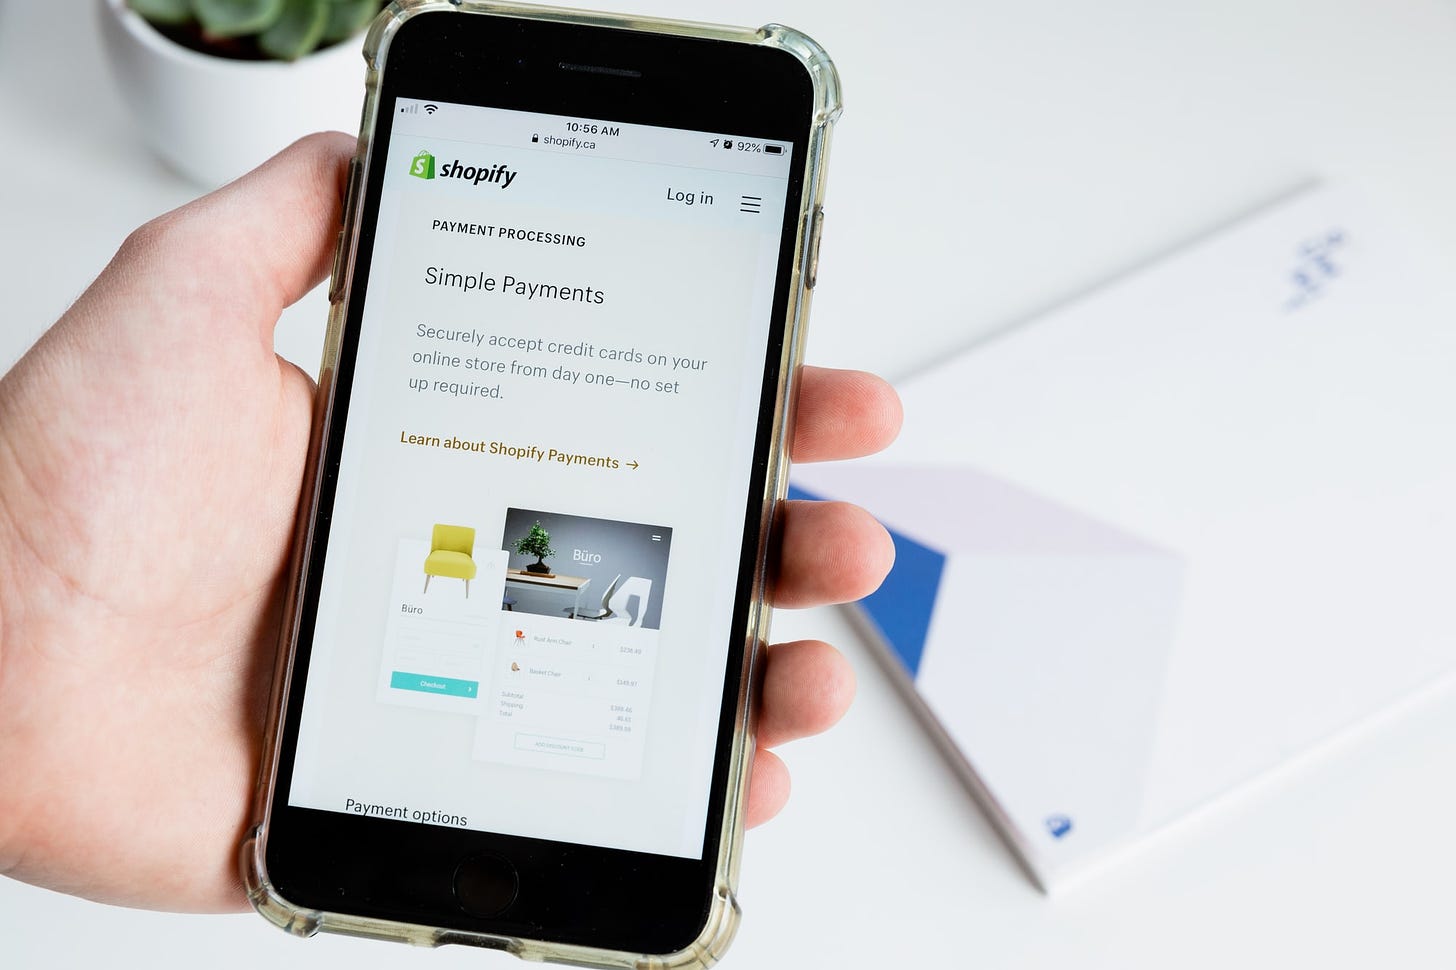 3 strategies Shopify used to build a $200B platform 📈